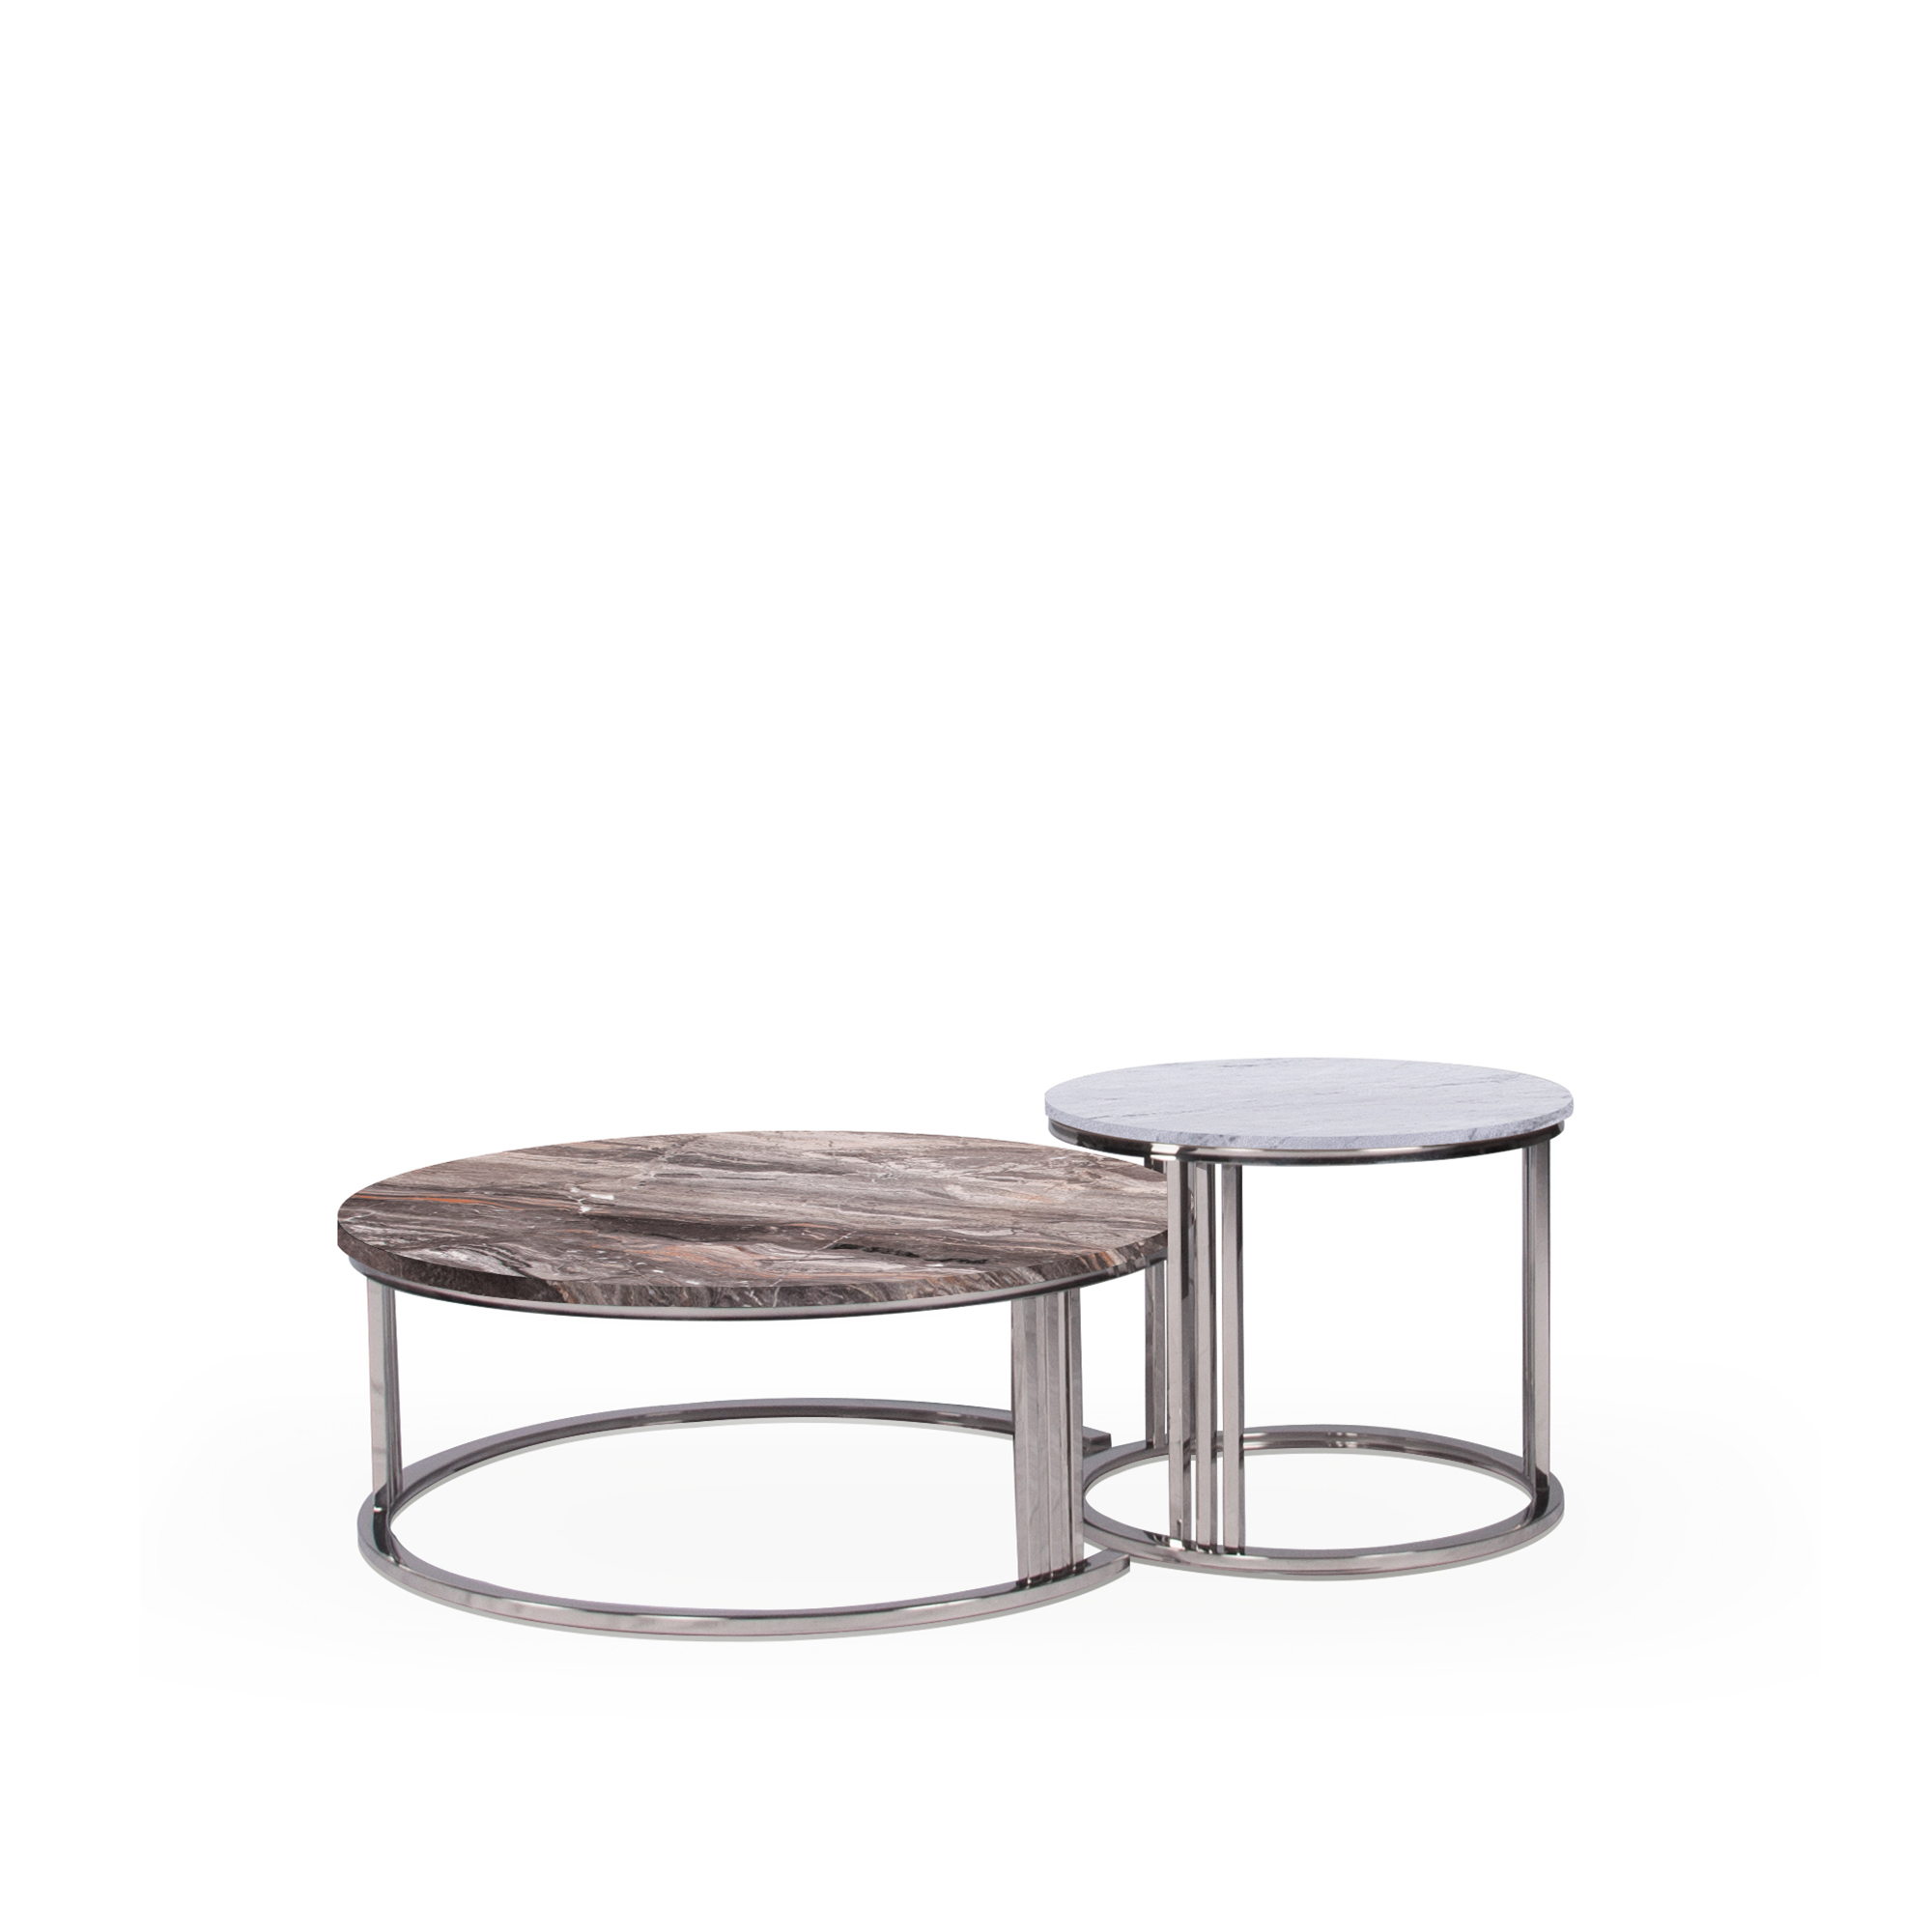 PAXTON C | Decasa Marble Marble Dining Table